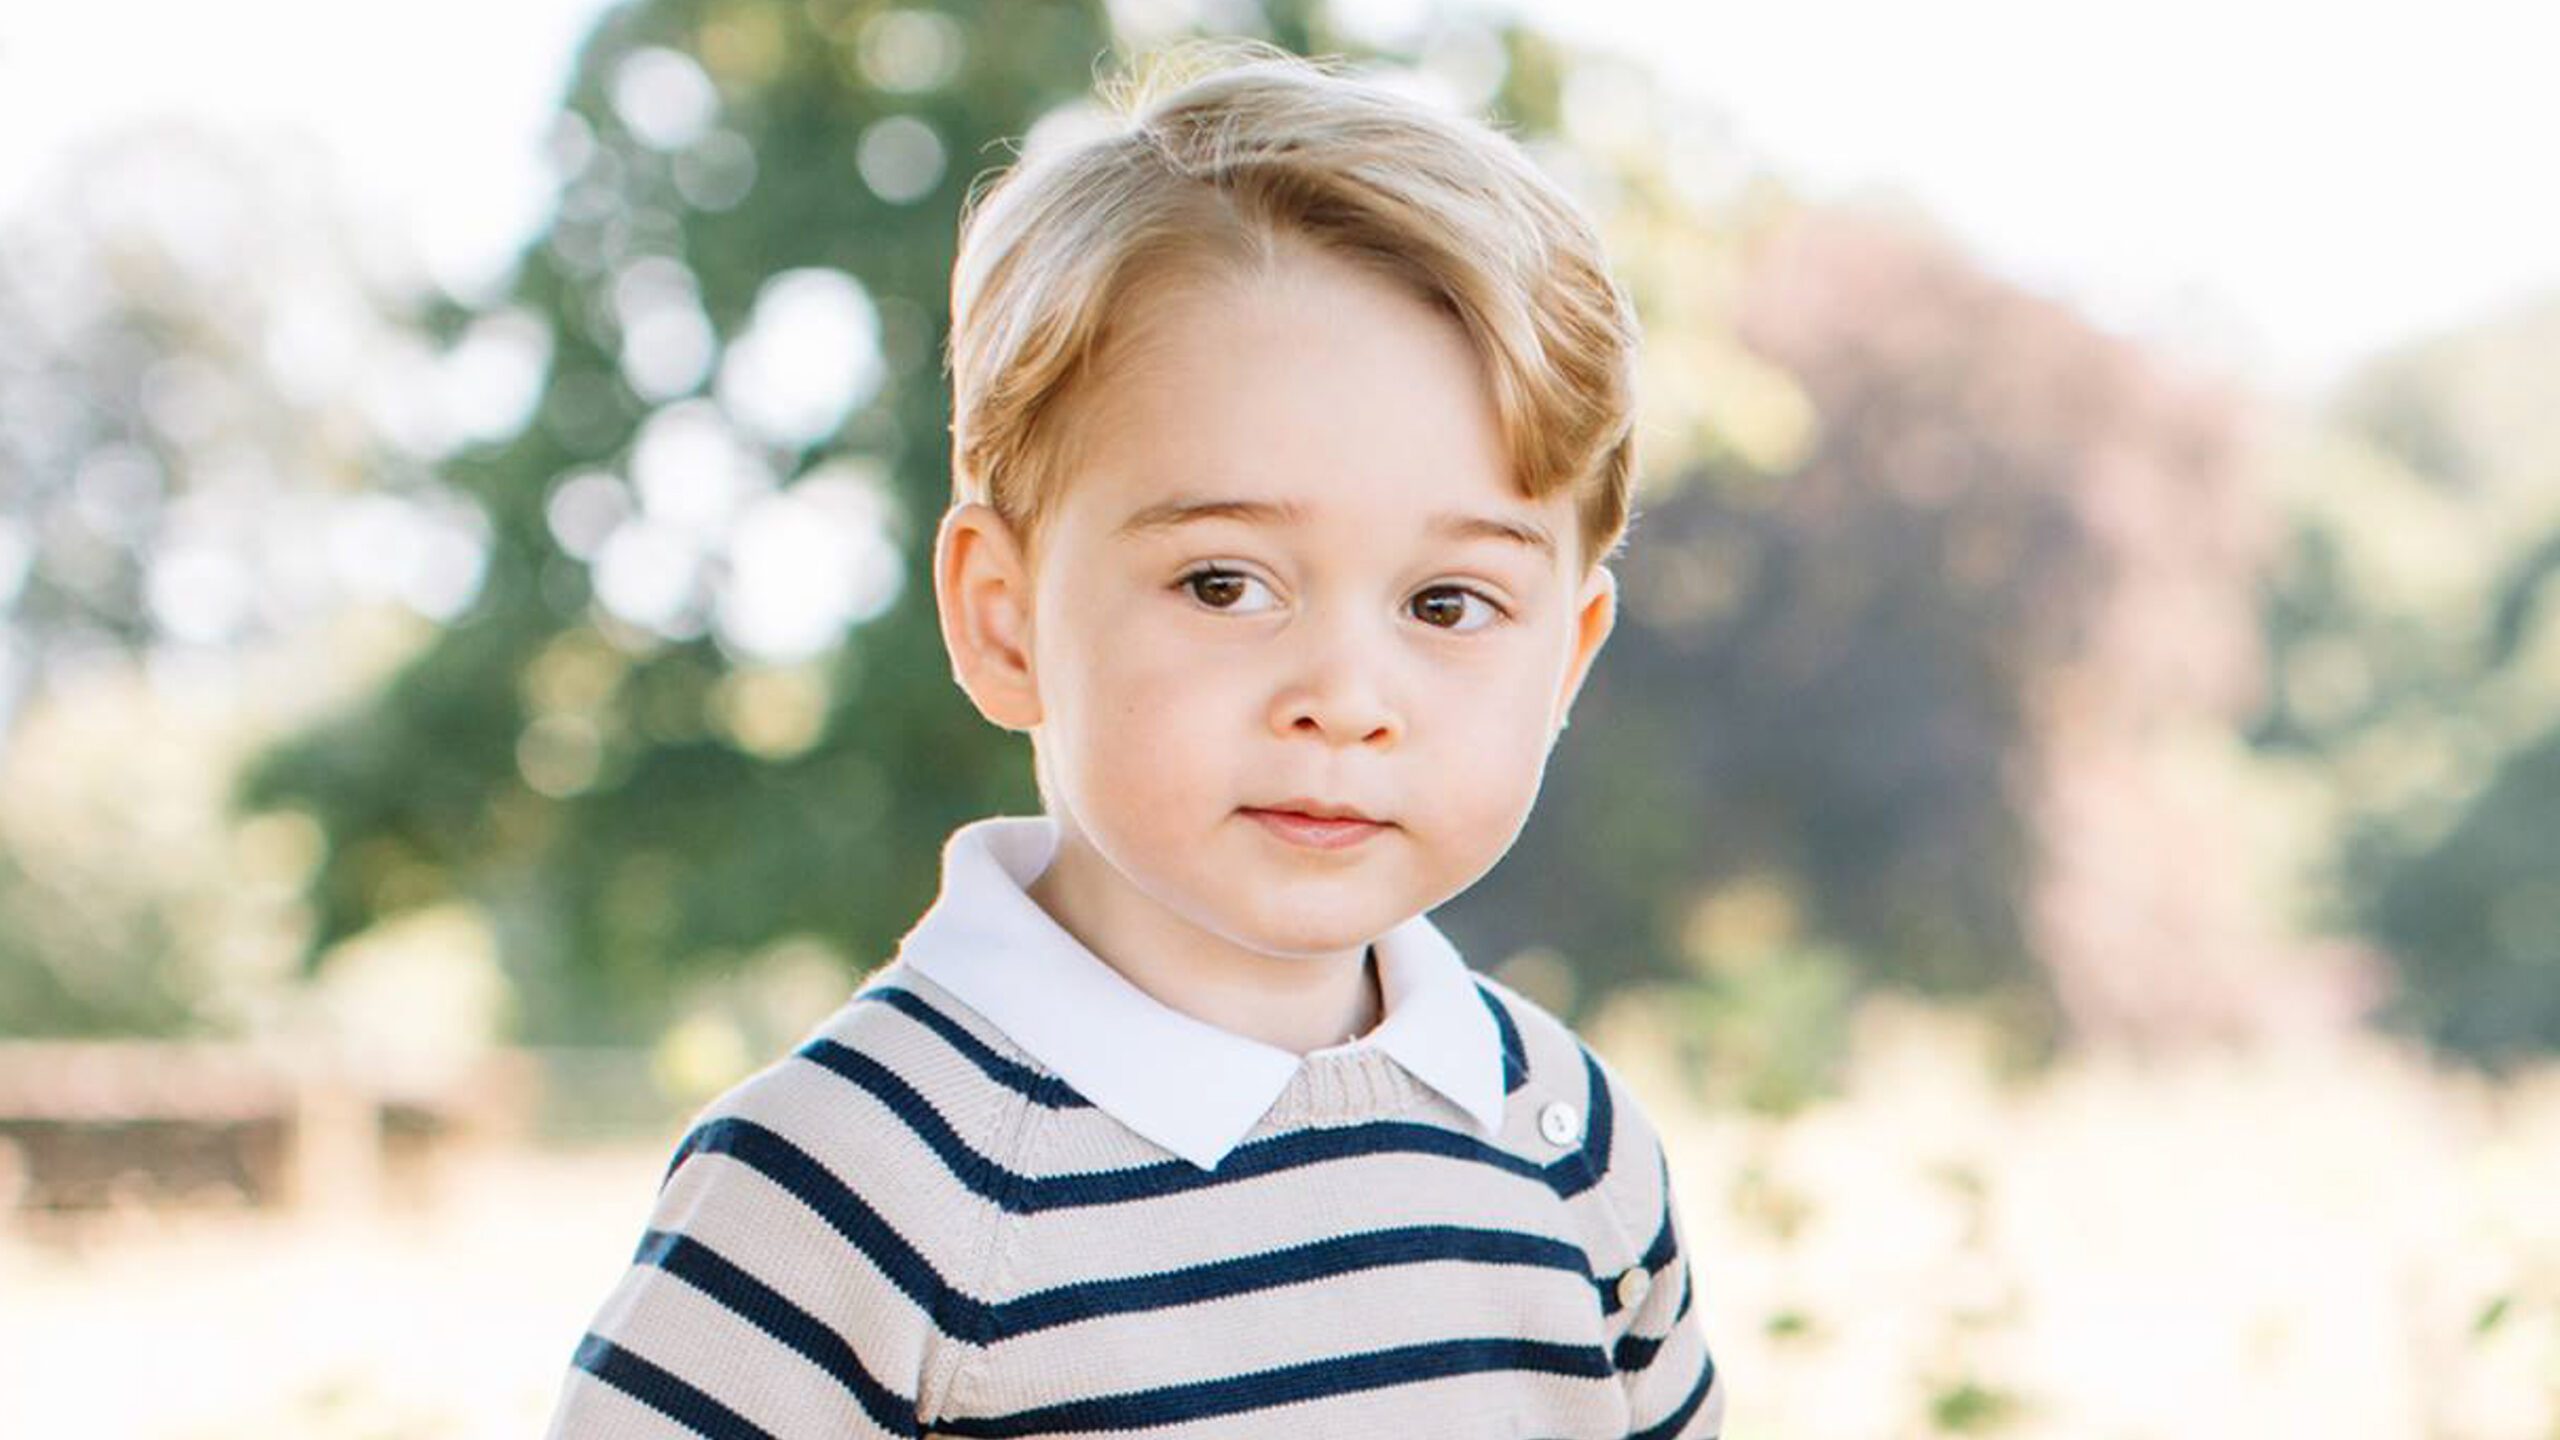 IN PHOTOS: Prince George turns 3